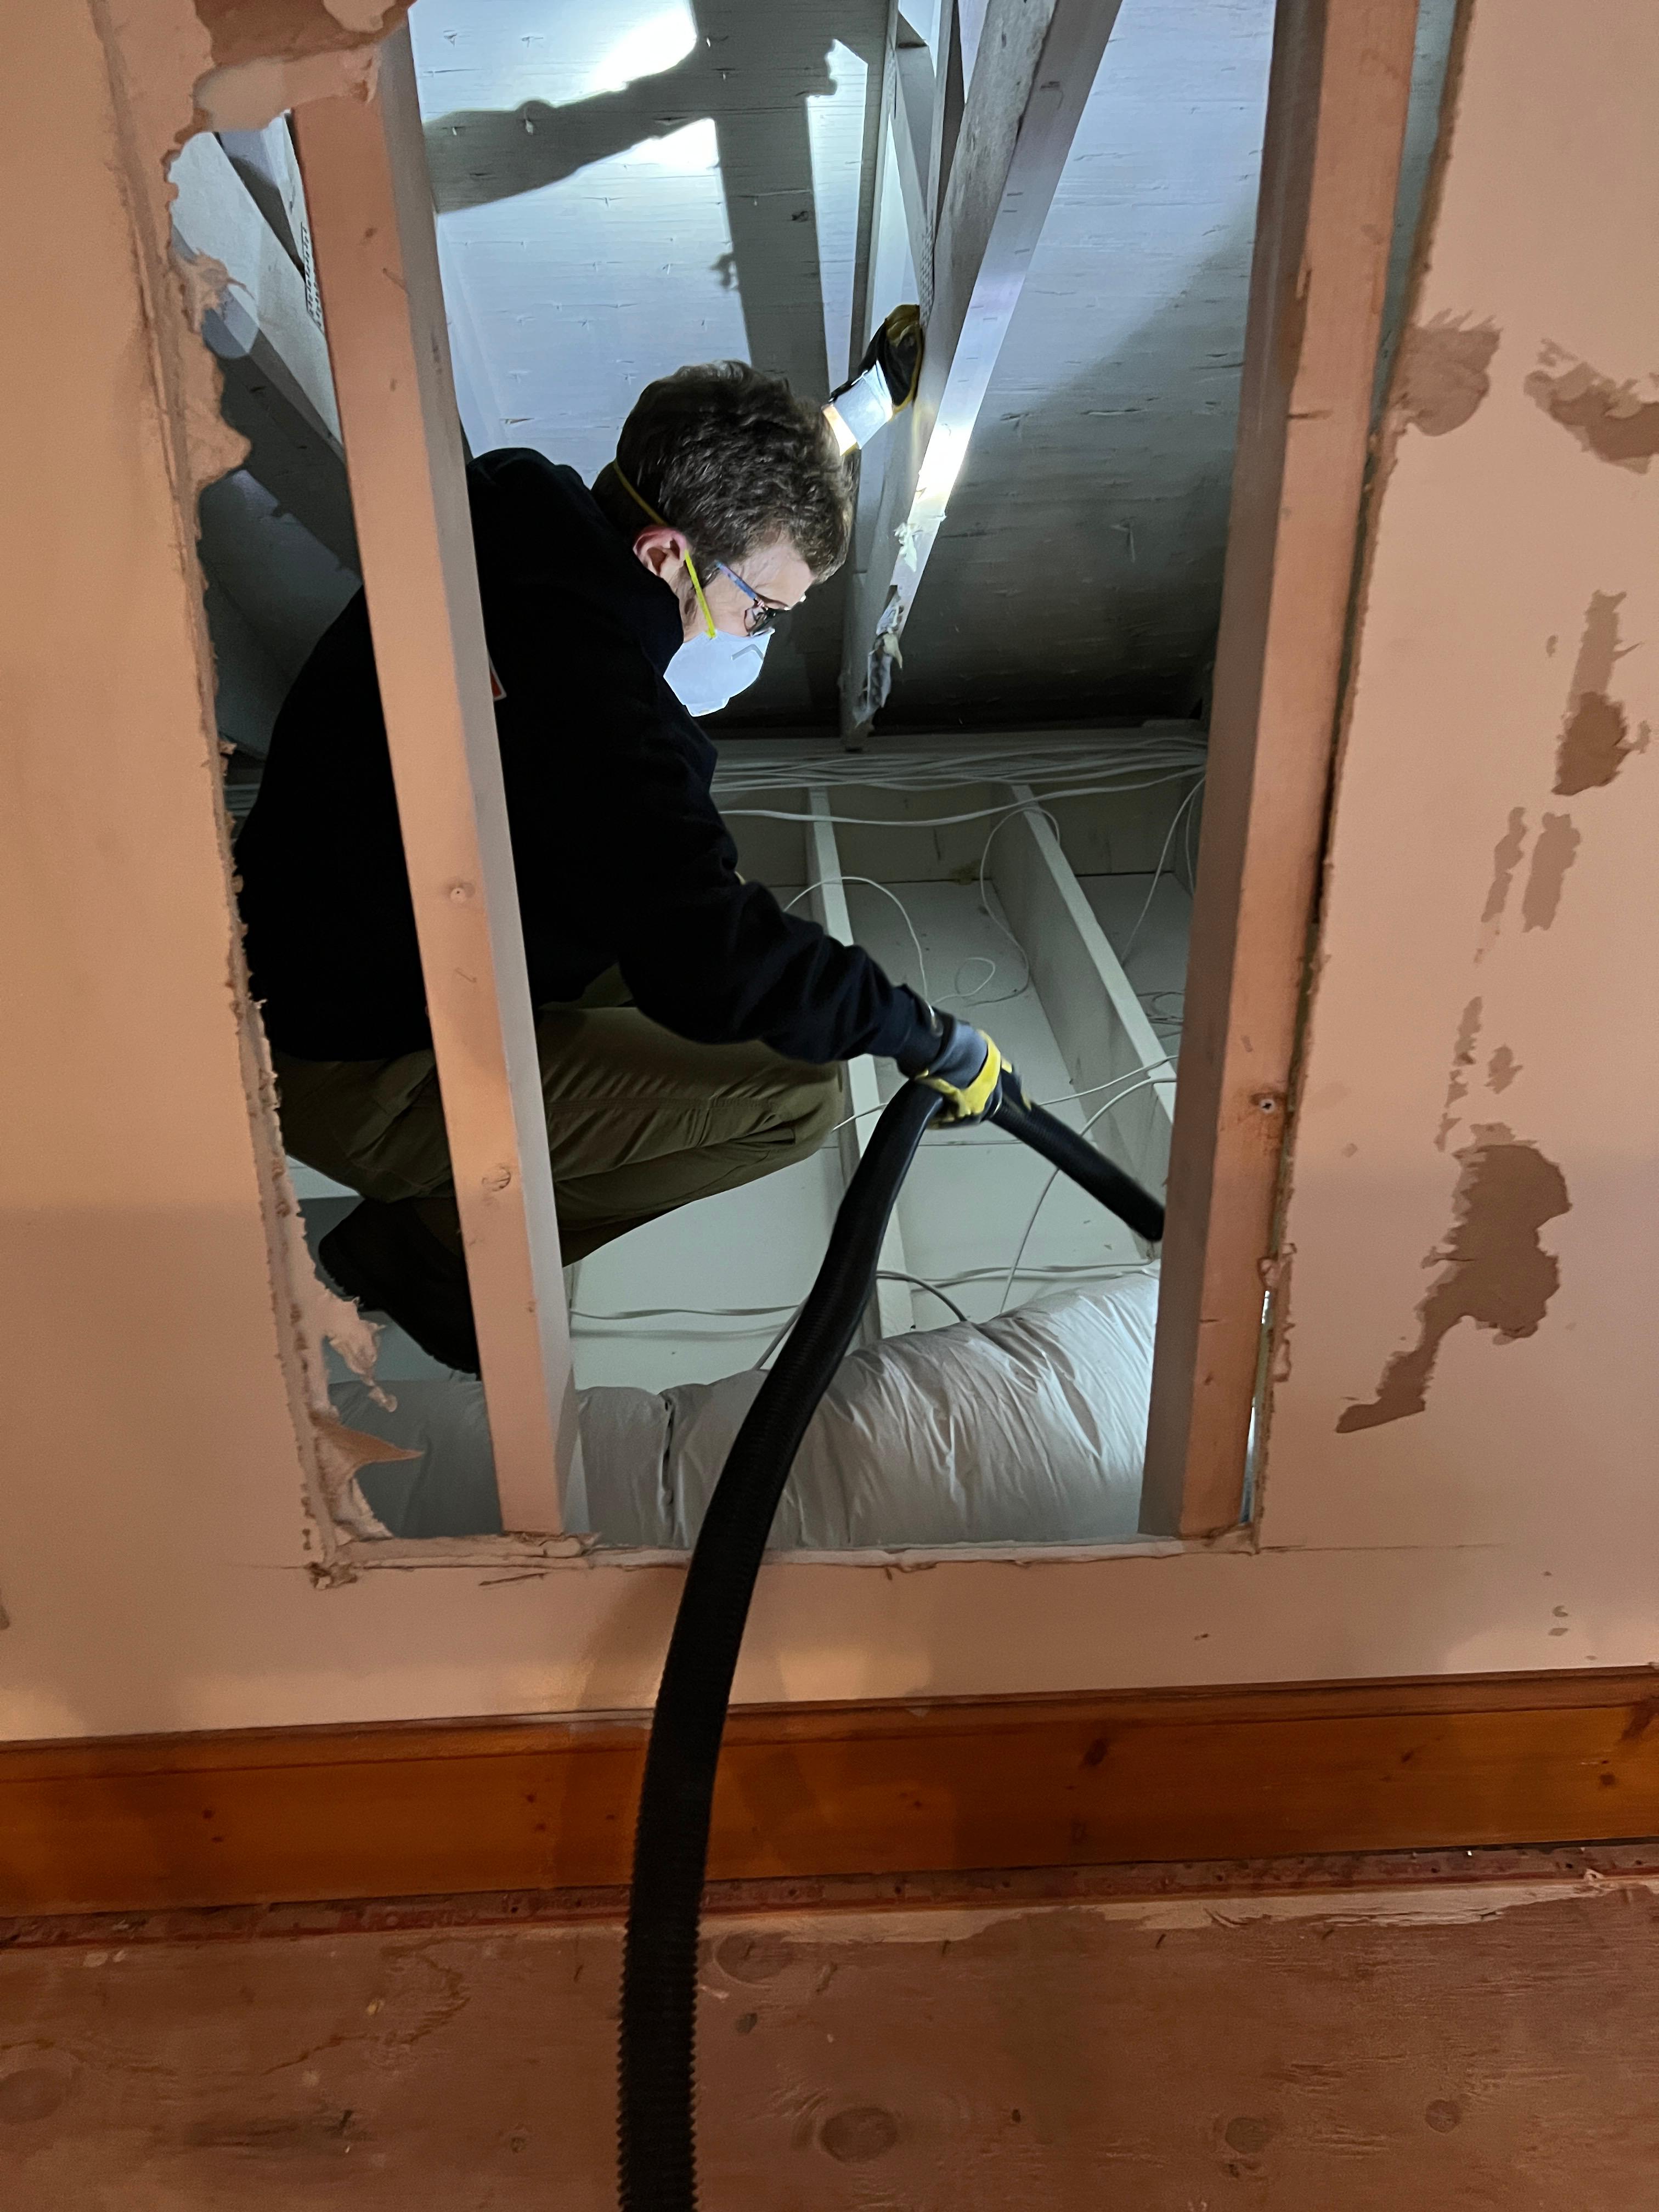 SERVPRO of Spencer & Iowa Great Lakes is ready to assist in the cleanup of biohazard materials and provide deep cleaning services for your home.